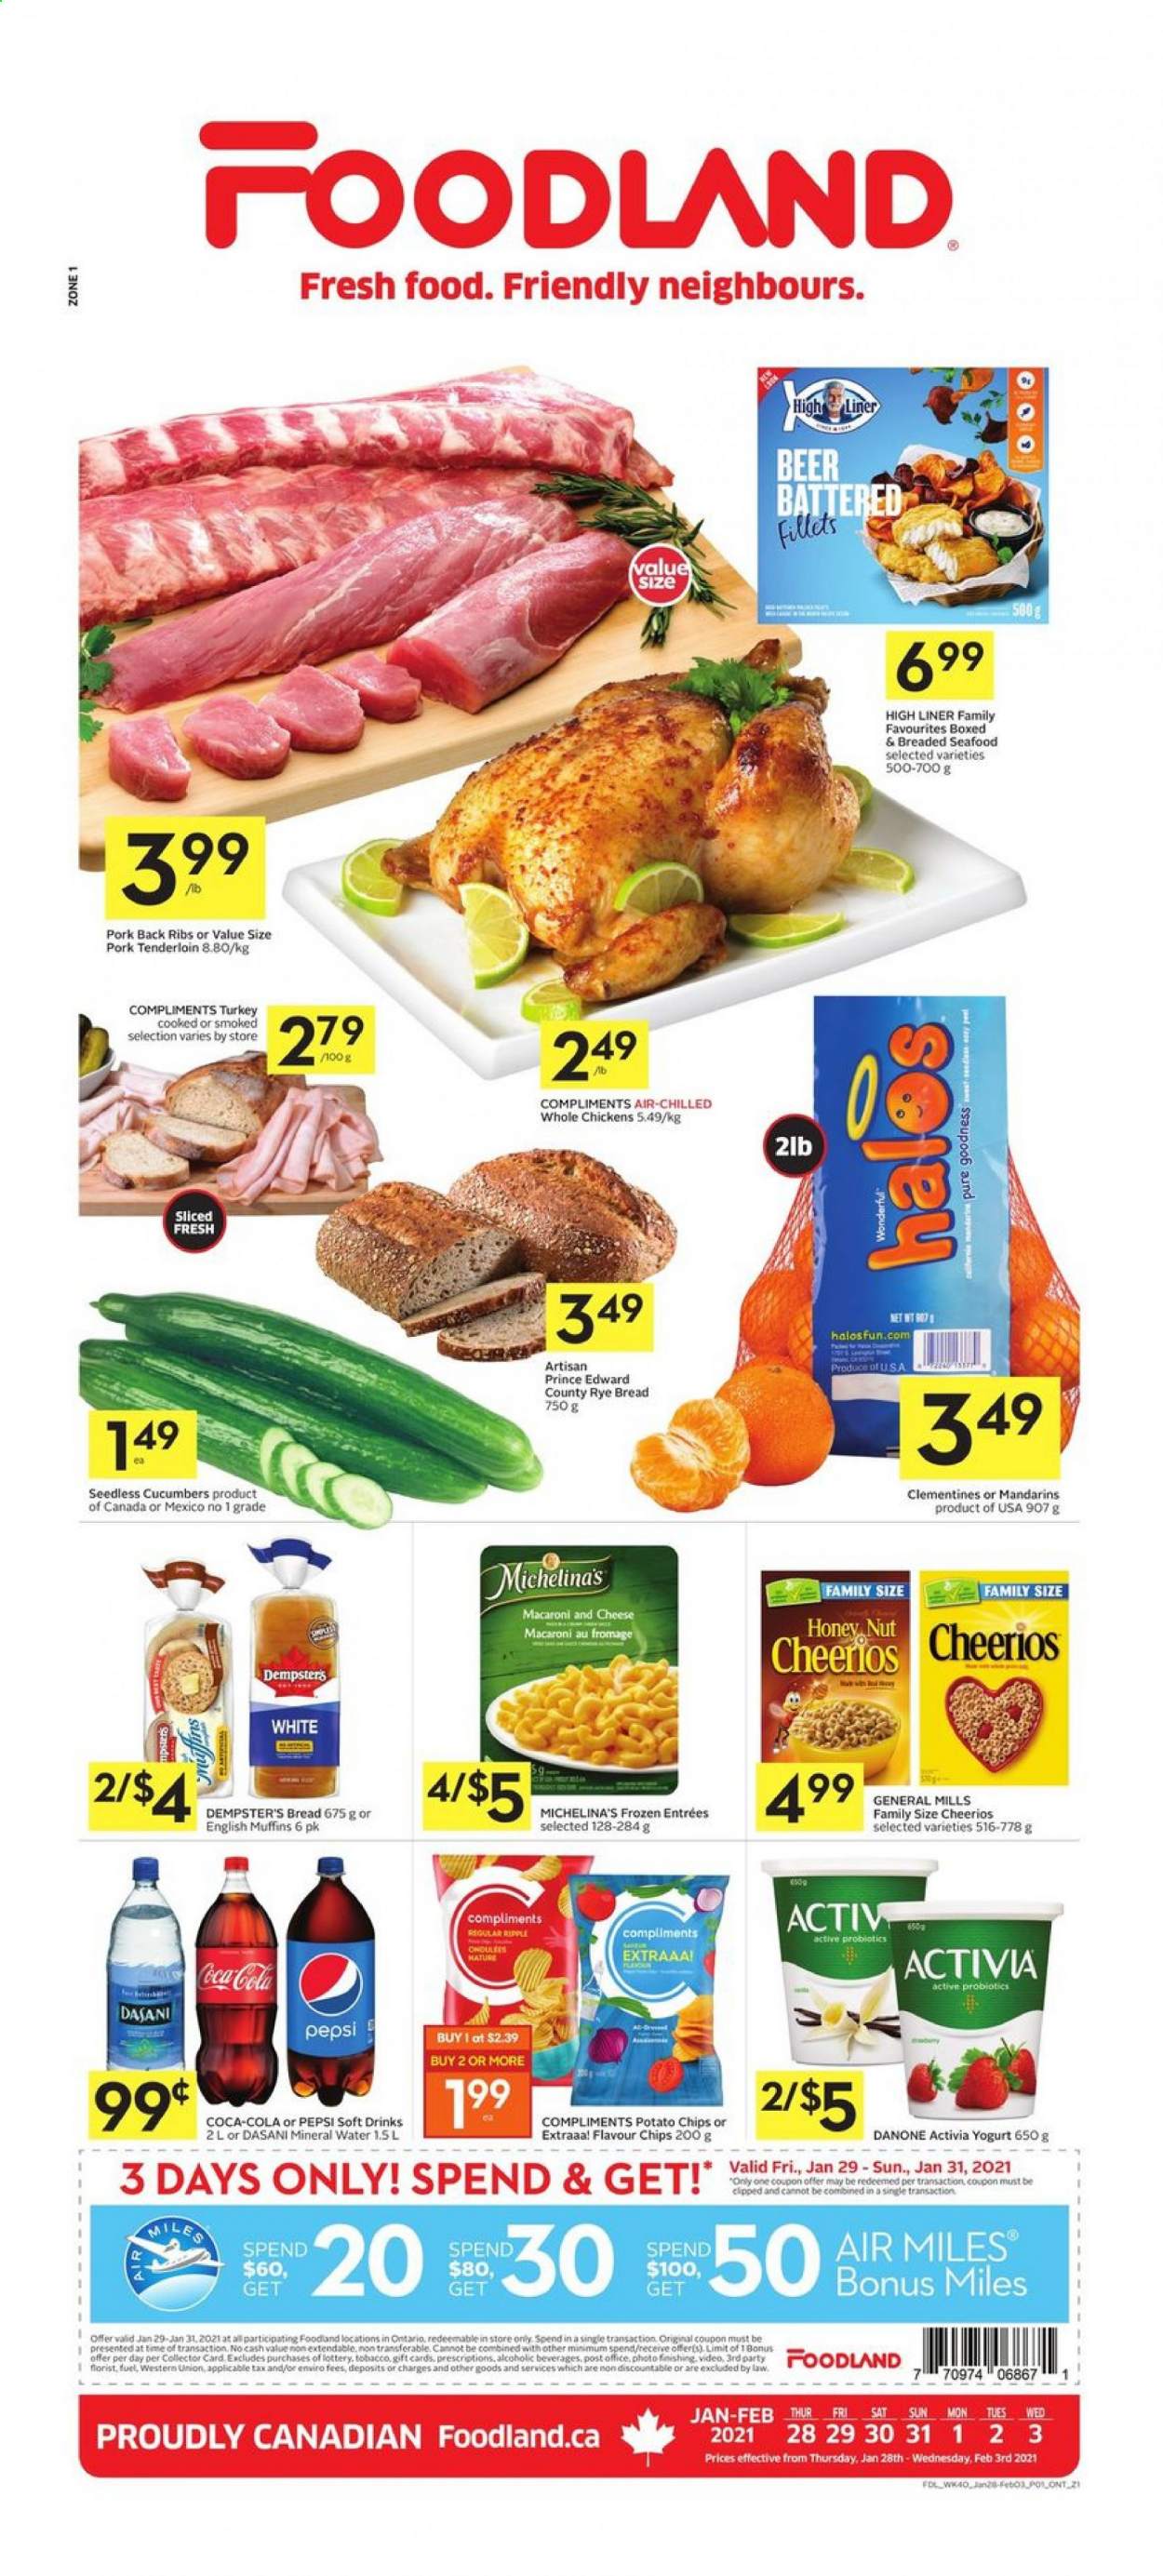 thumbnail - Foodland Flyer - January 28, 2021 - February 03, 2021 - Sales products - bread, english muffins, cucumber, clementines, mandarines, seafood, macaroni & cheese, yoghurt, Activia, potato chips, Cheerios, Coca-Cola, Pepsi, soft drink, mineral water, beer, whole chicken, pork meat, pork ribs, pork tenderloin, pork back ribs, probiotics, Danone. Page 1.